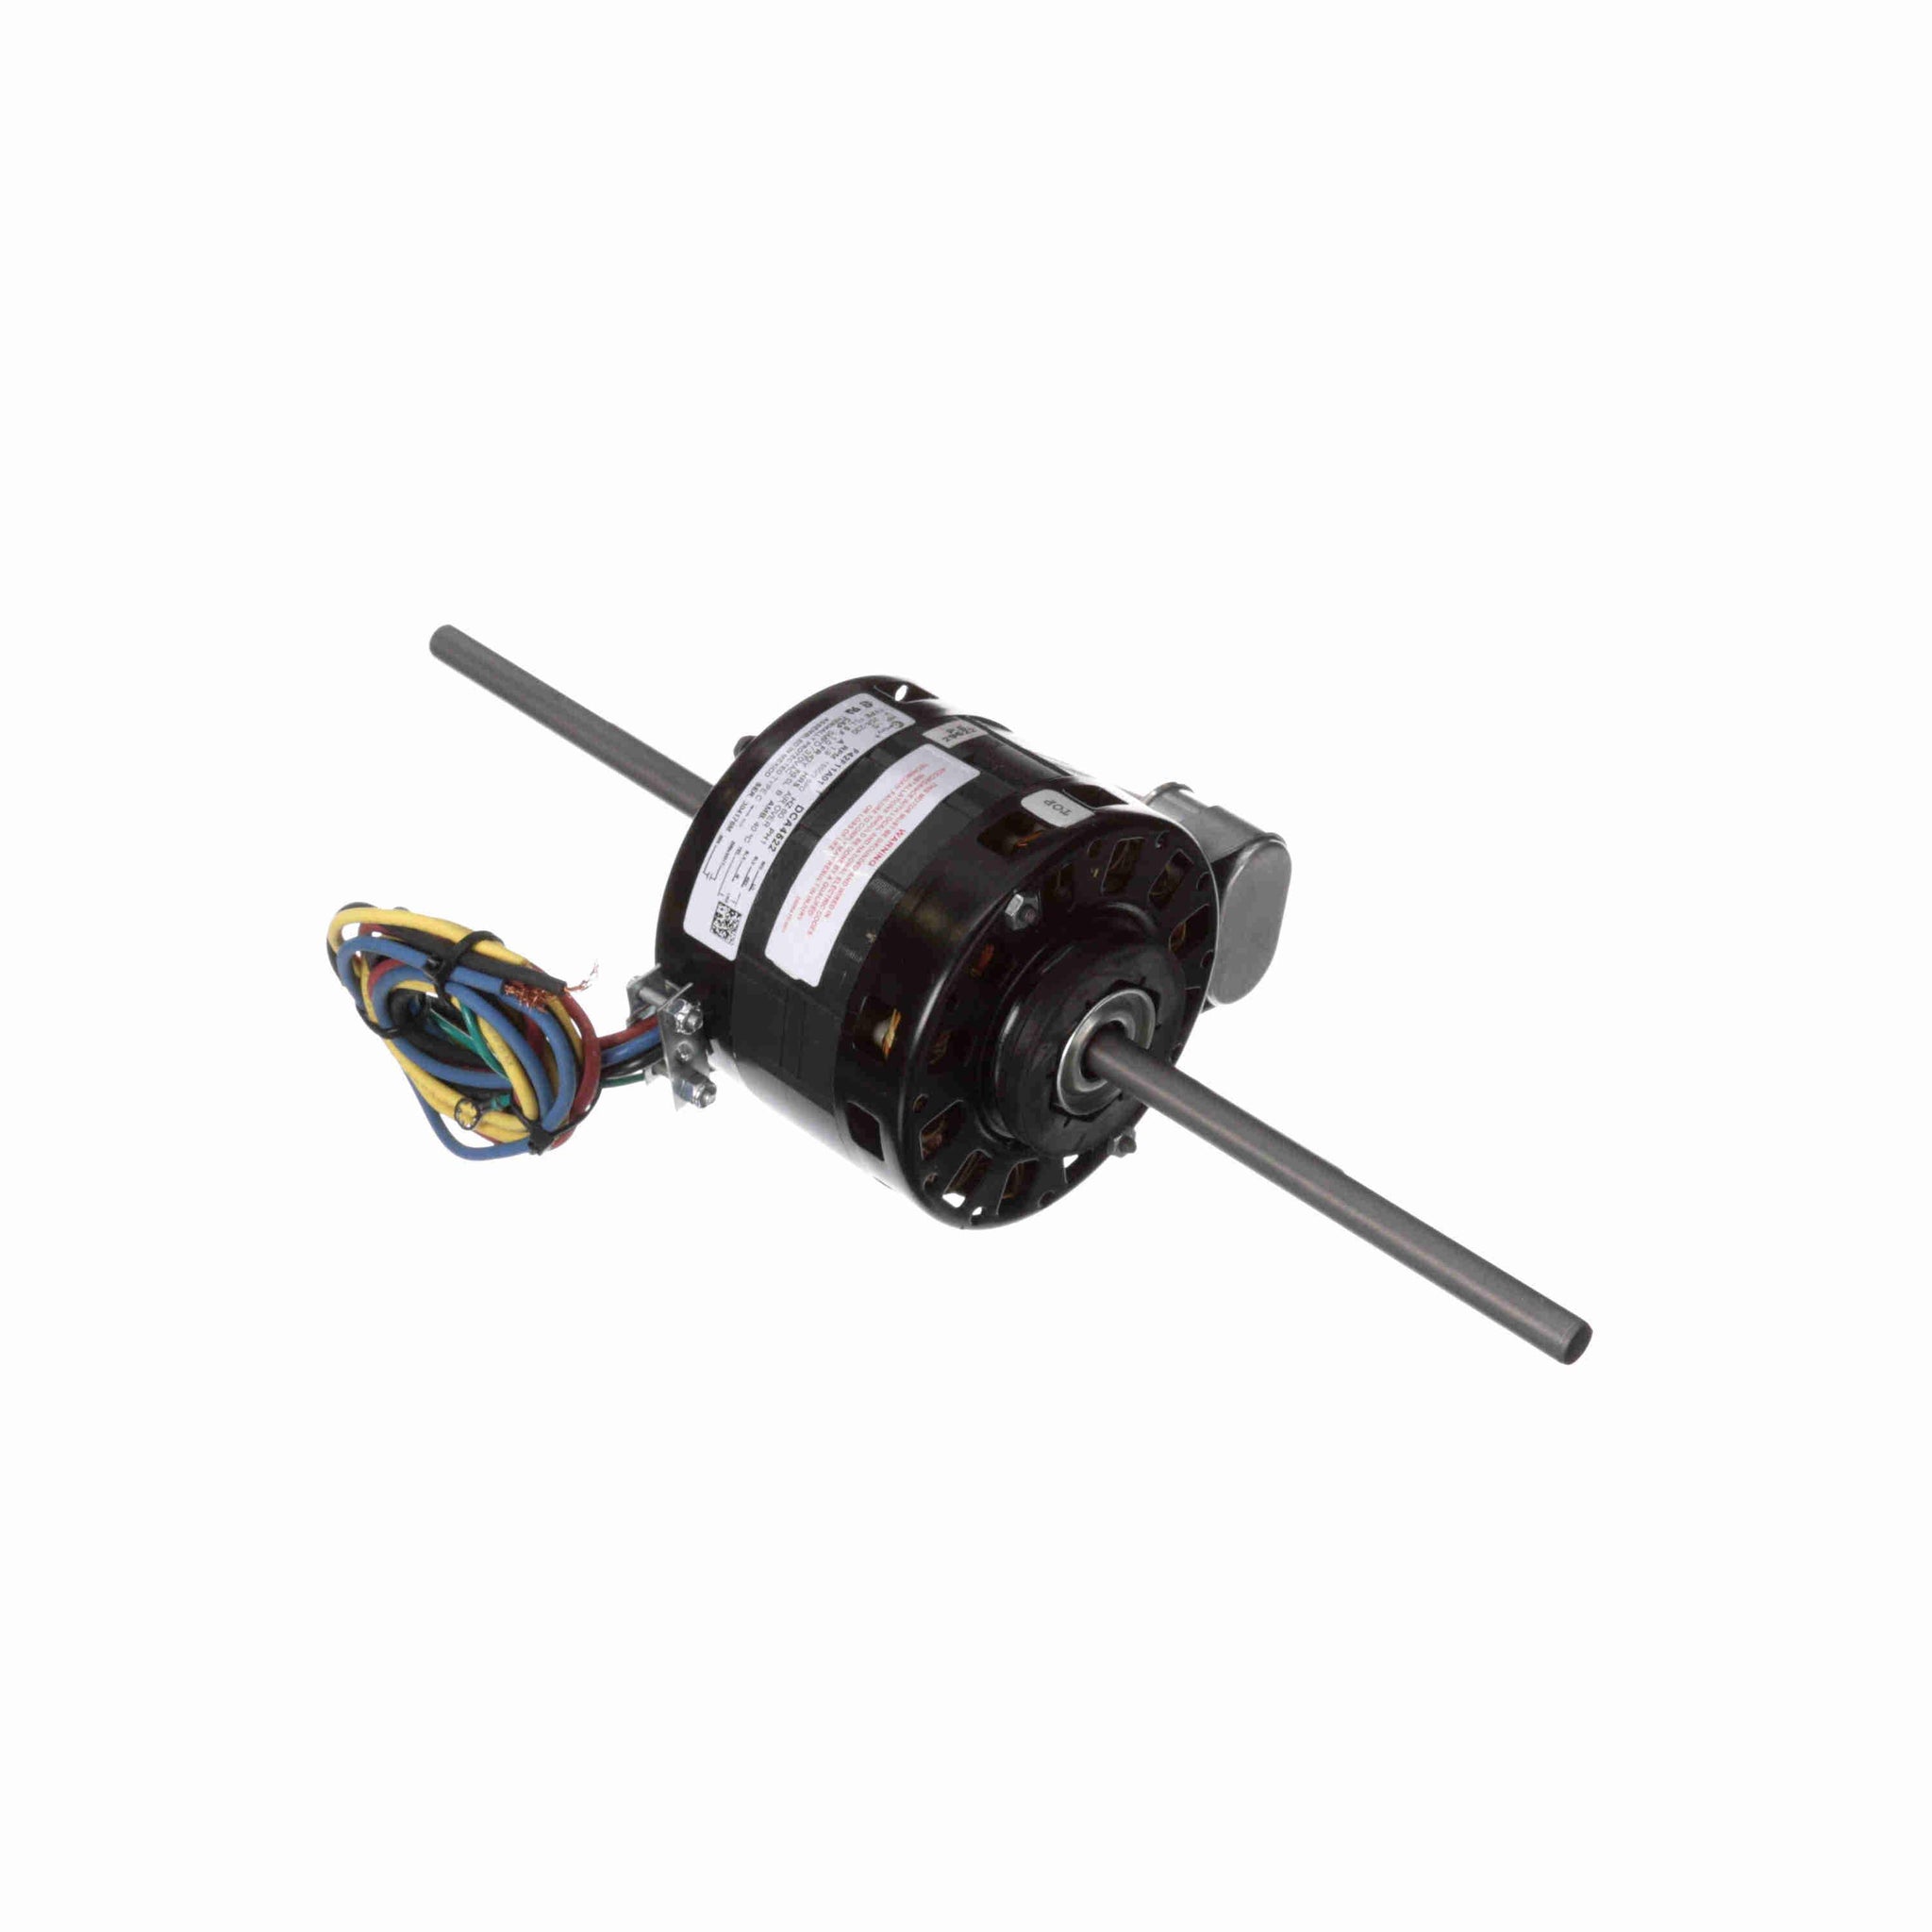 DCA4522 - 1/5 HP OEM Replacement Motor, 1550 RPM, 3 Speed, 208-230 Volts, 42 Frame, OAO - Hardware & Moreee